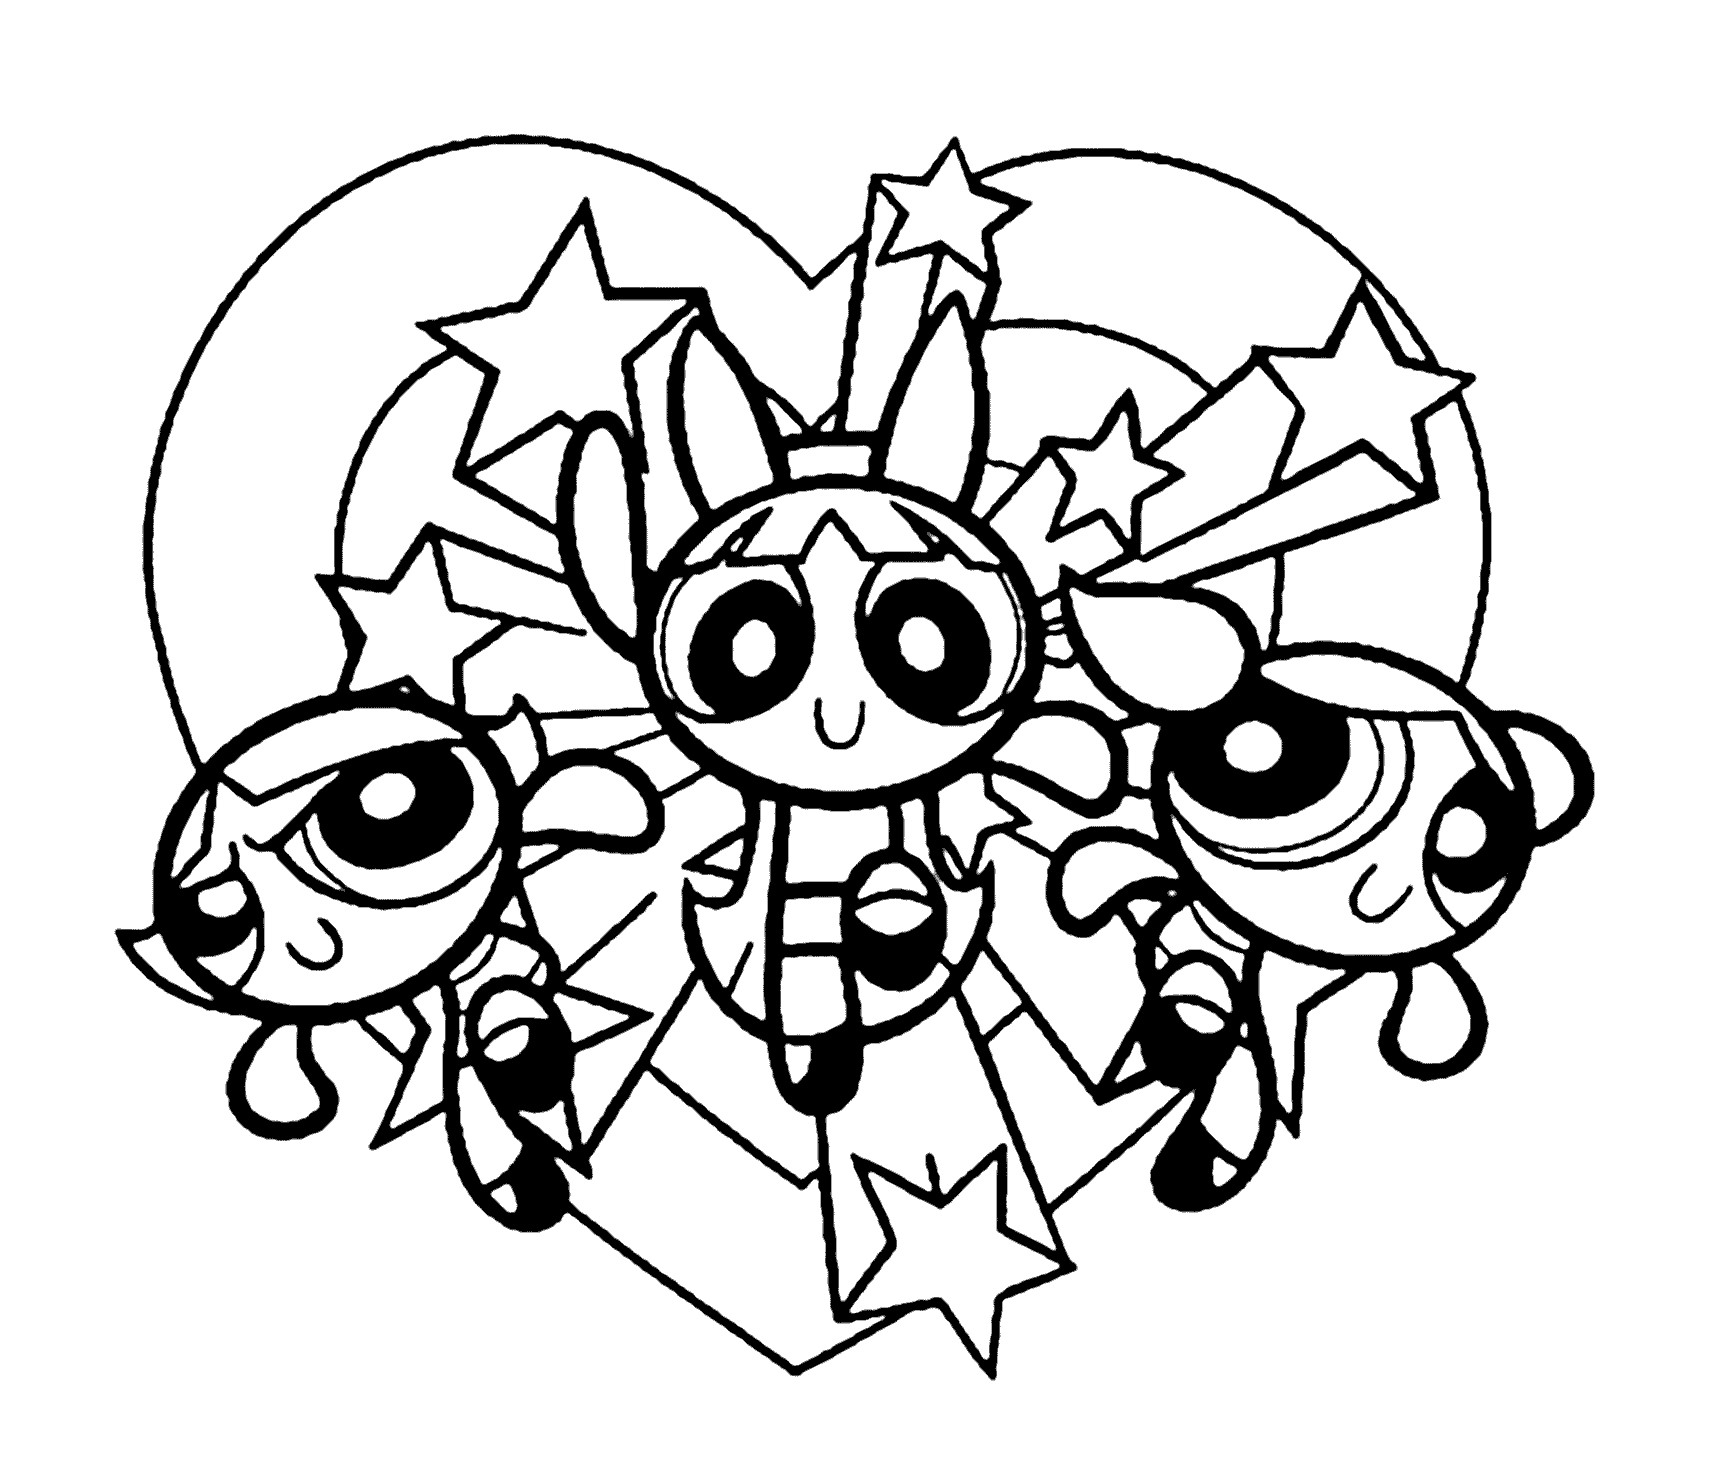 Powerpuff Girls Coloring Pages
 Cool Powerpuff girls on vacation coloring pages for kids